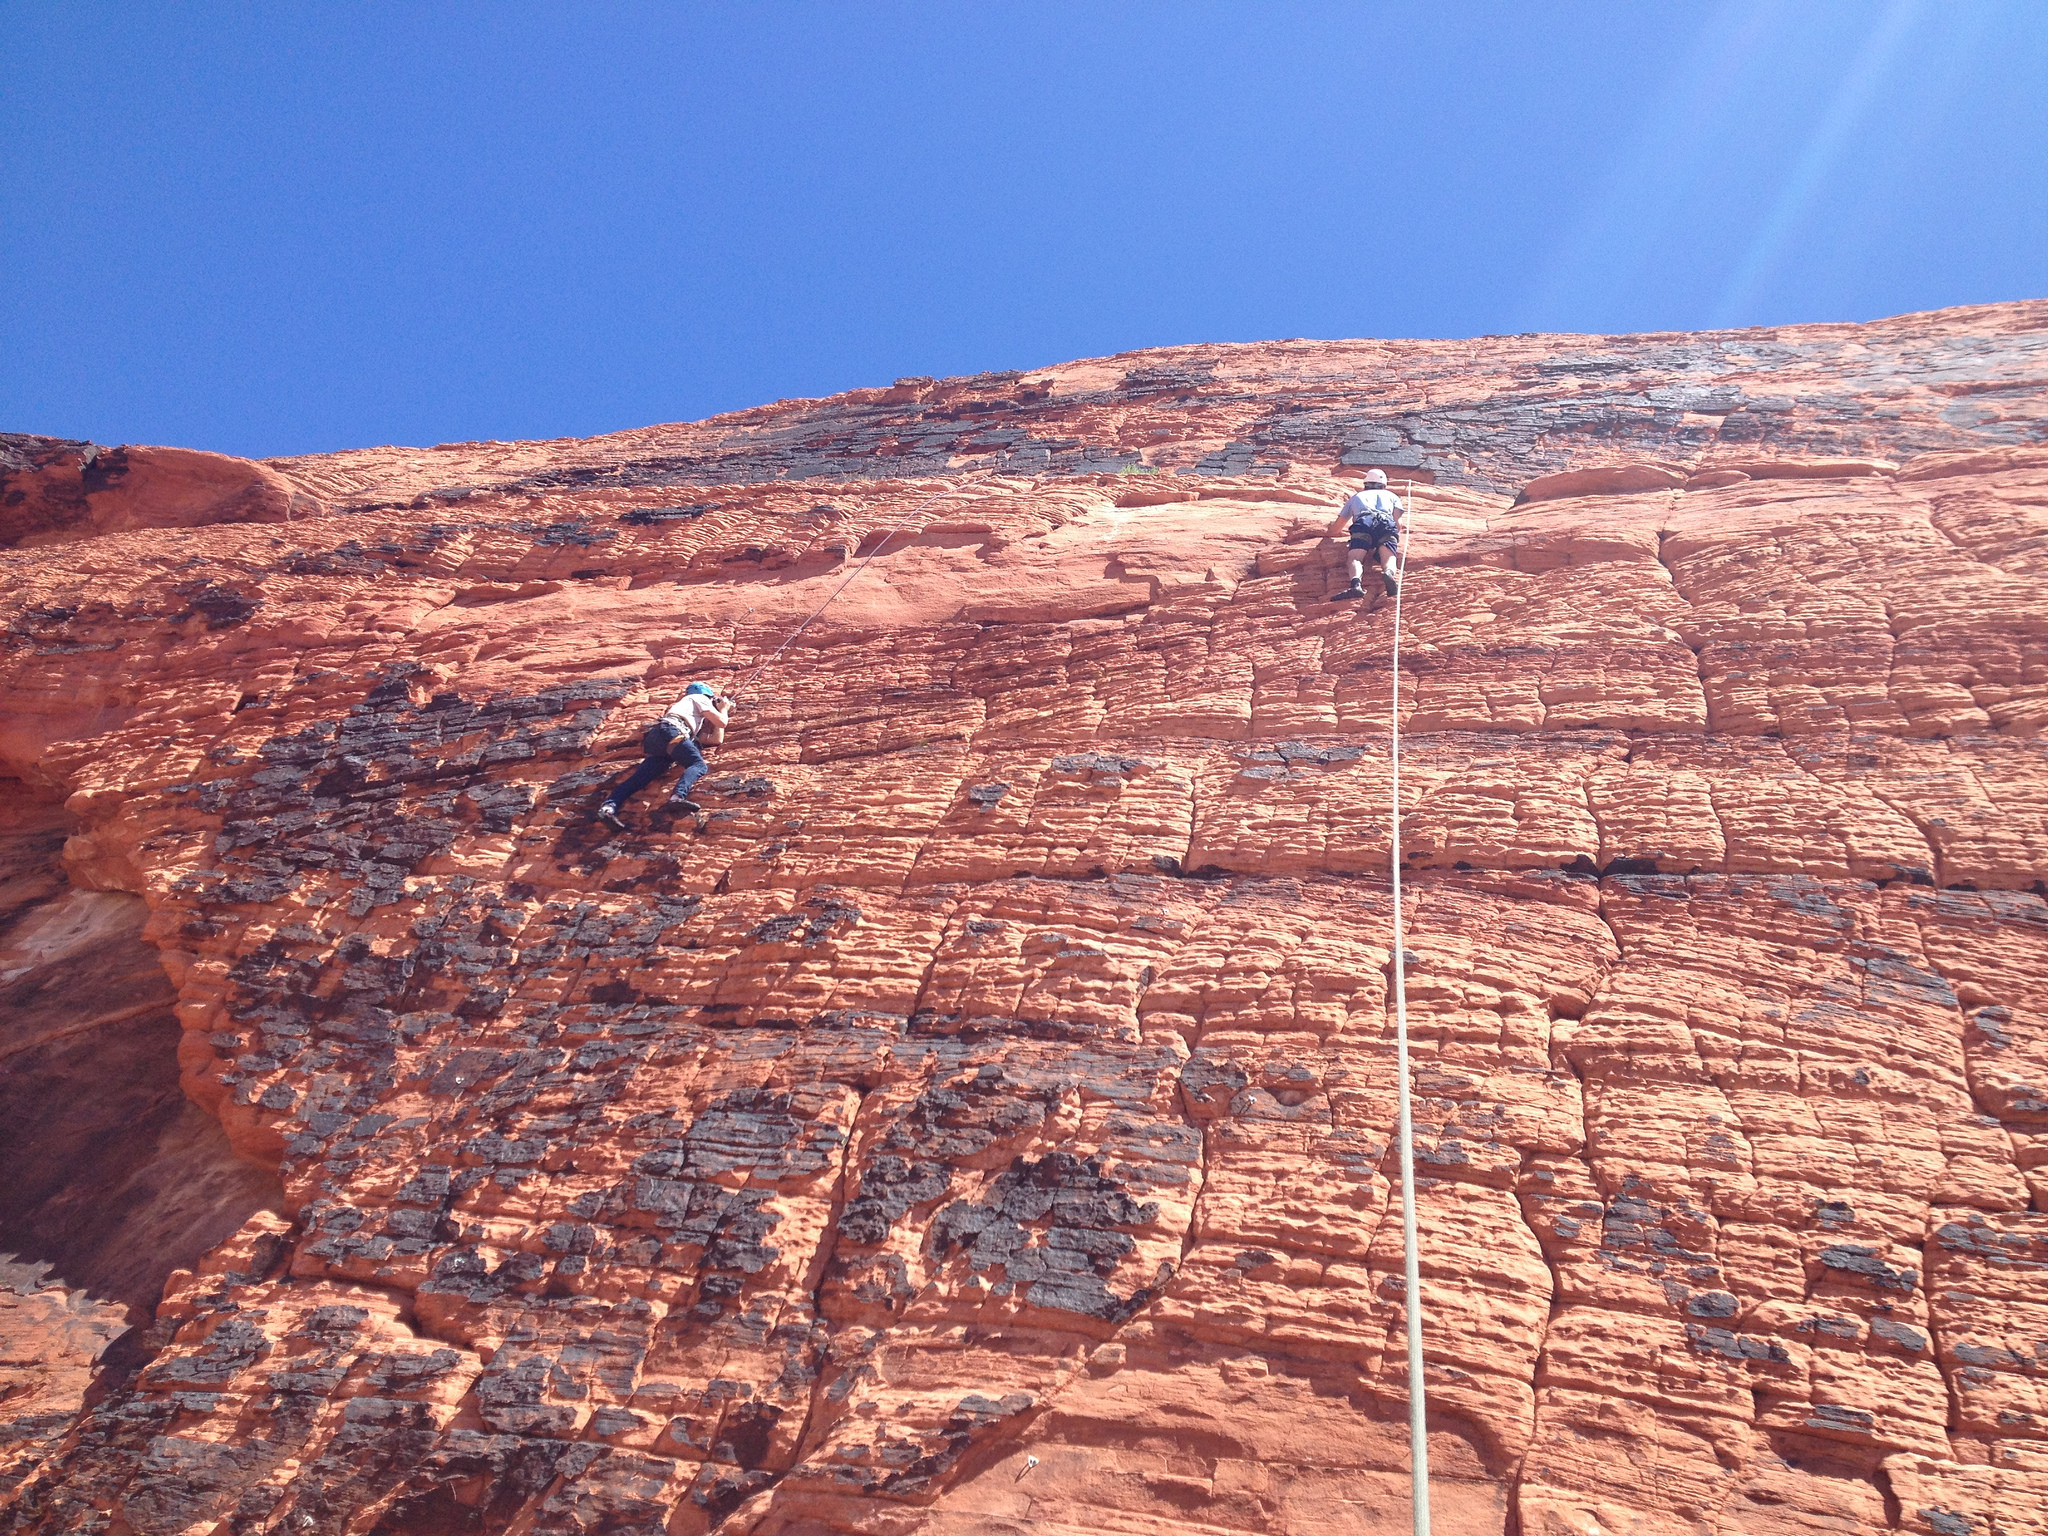 American Alpine Institute helps production company with mountain safety while filming in Red Rock, NV.